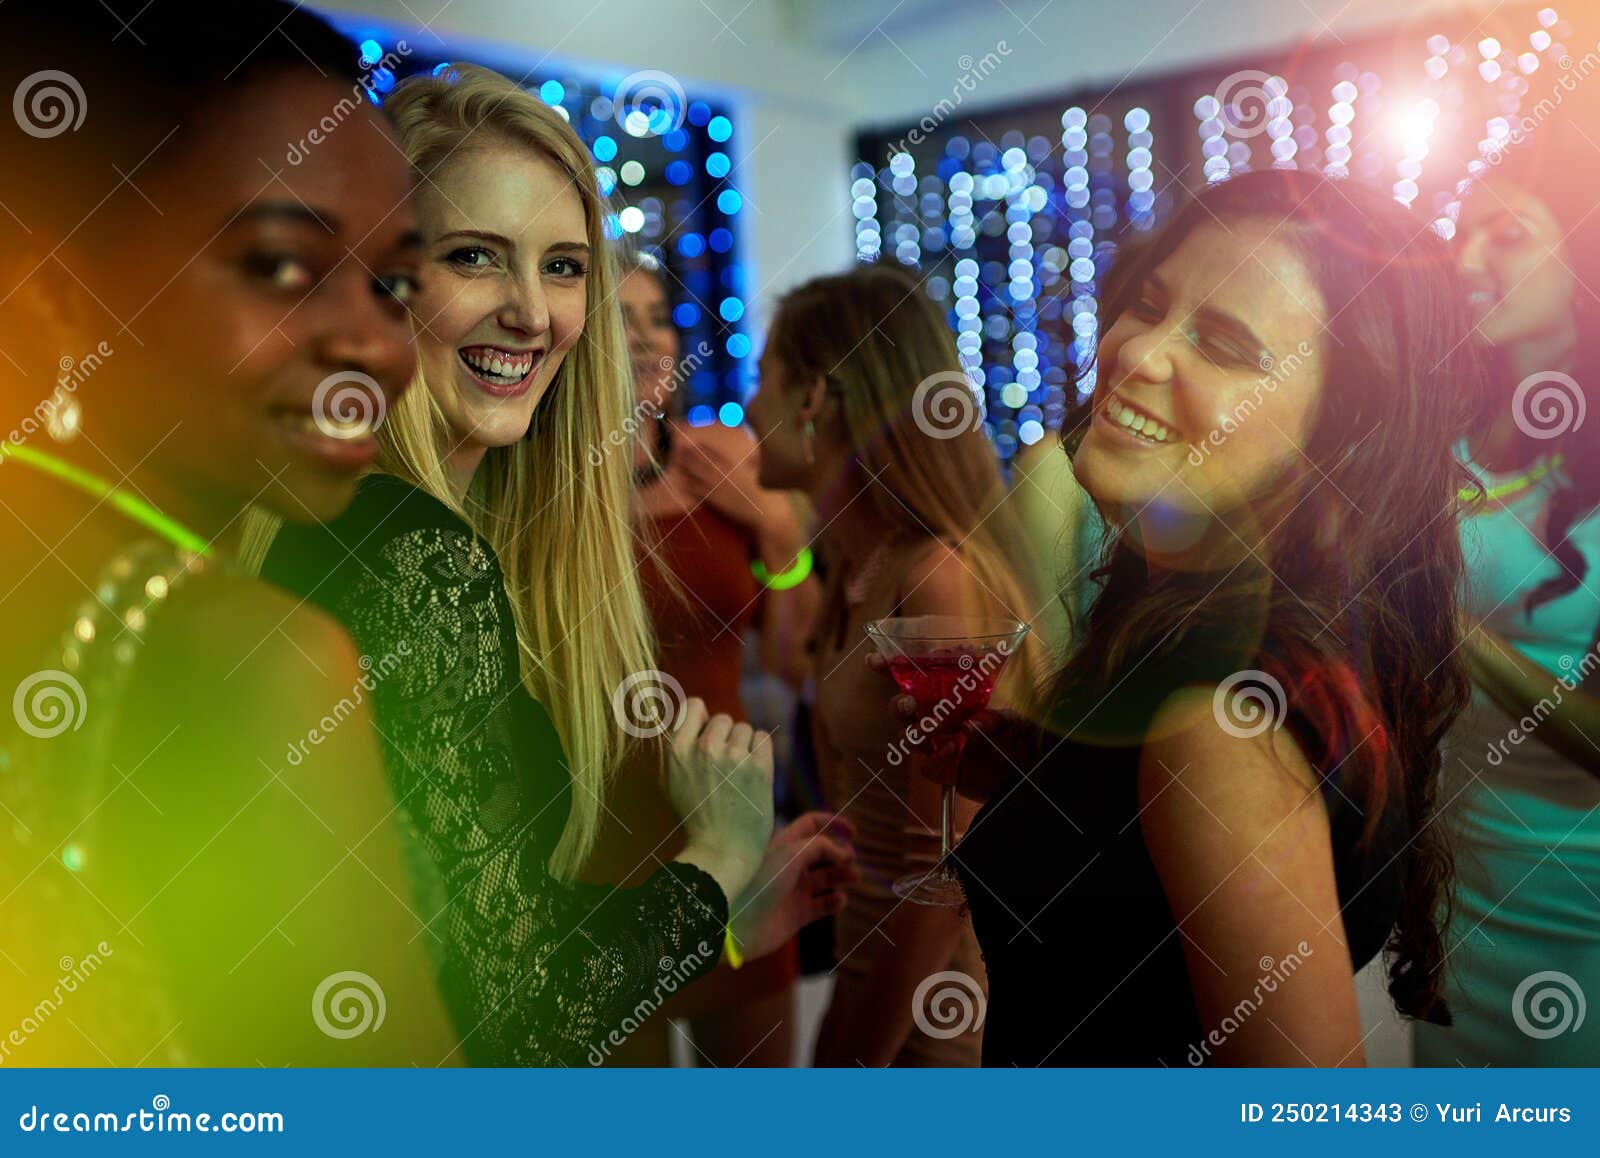 We Love the Nightlife. Shot of a Group of Young People Enjoying ...